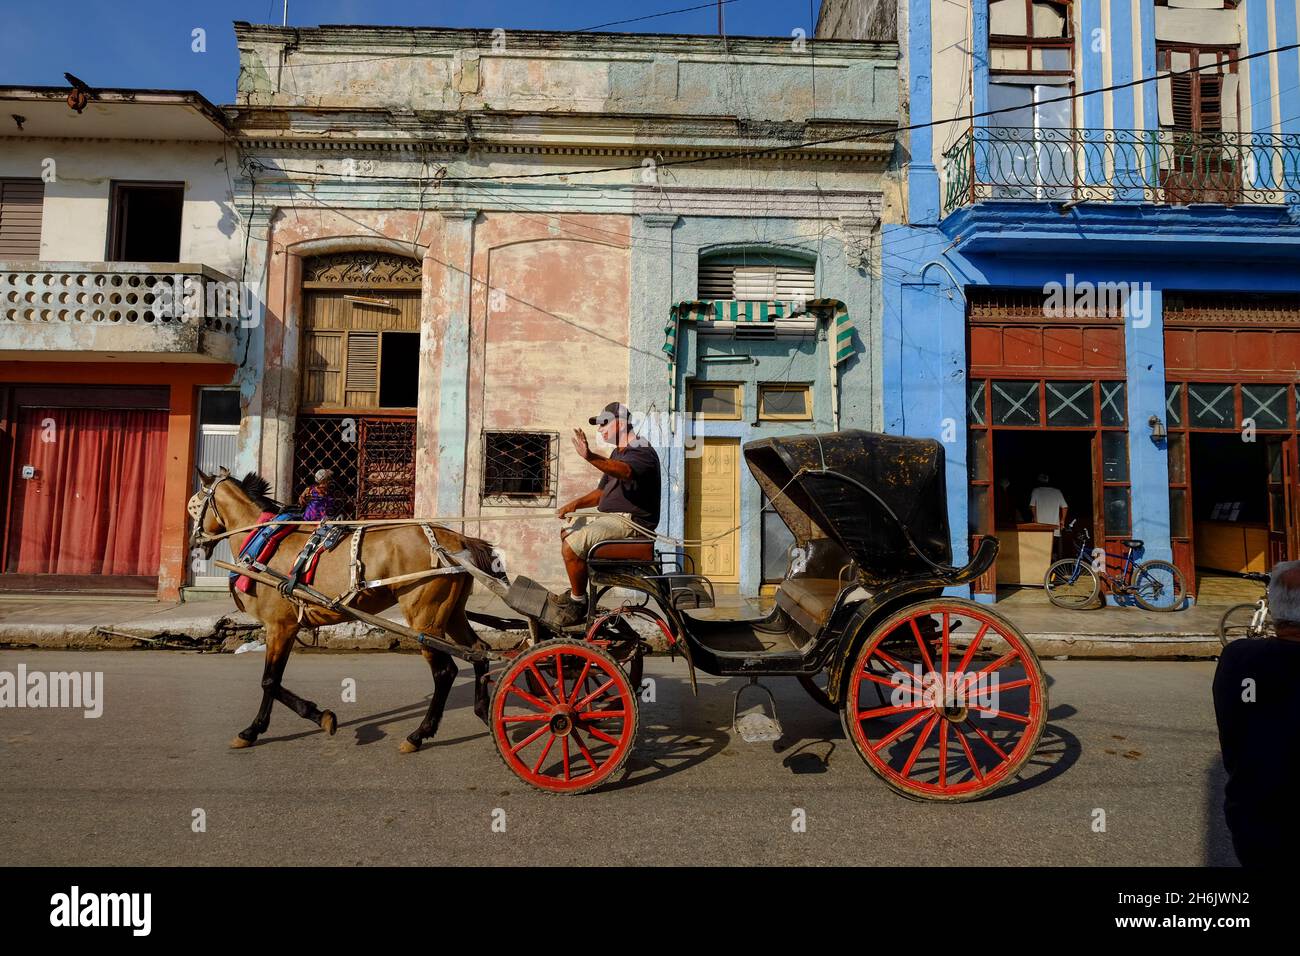 A horse-drawn carriage driver waves as he passes by, Cardenas, Matanzas, Cuba, West Indies, Central America Stock Photo